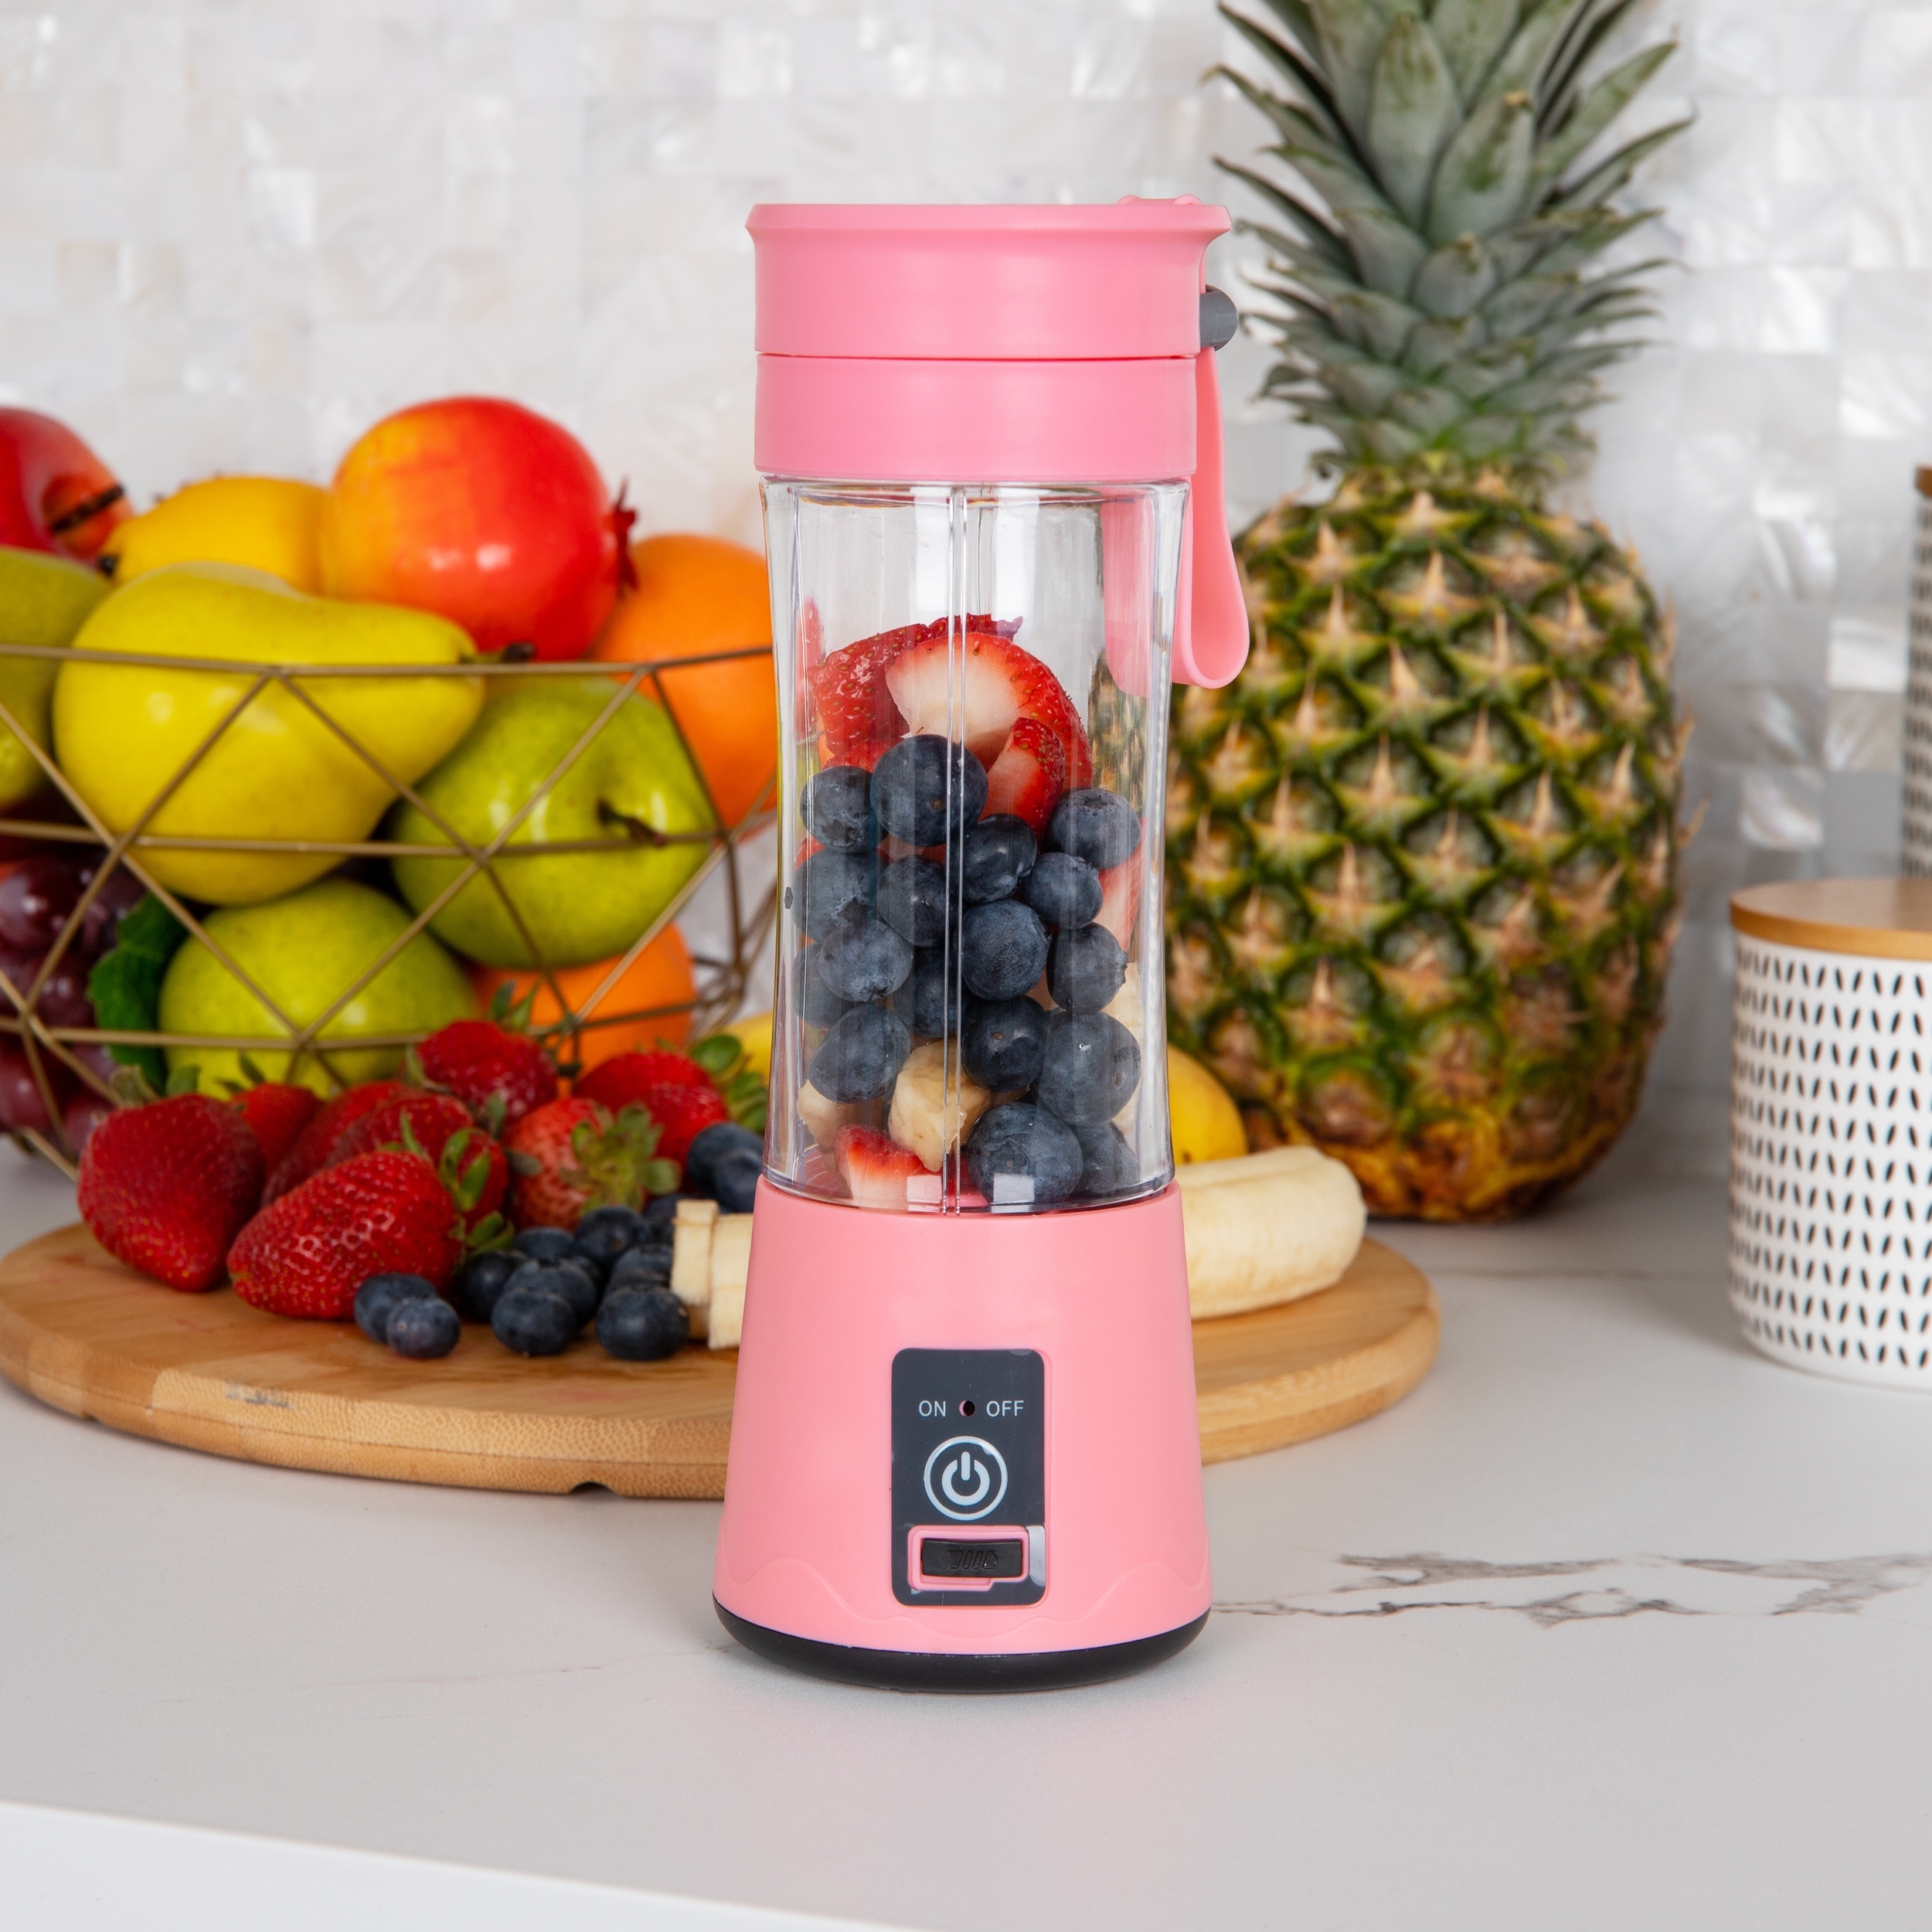 https://ak1.ostkcdn.com/images/products/is/images/direct/aa5ccfe133e34f3f9d6603a94ed404ce39862ebd/Mind-Reader-Handheld%2C-Rechargeable-Personal-Juicer%2C-USB-Powered%2C-Portable-Blender.jpg